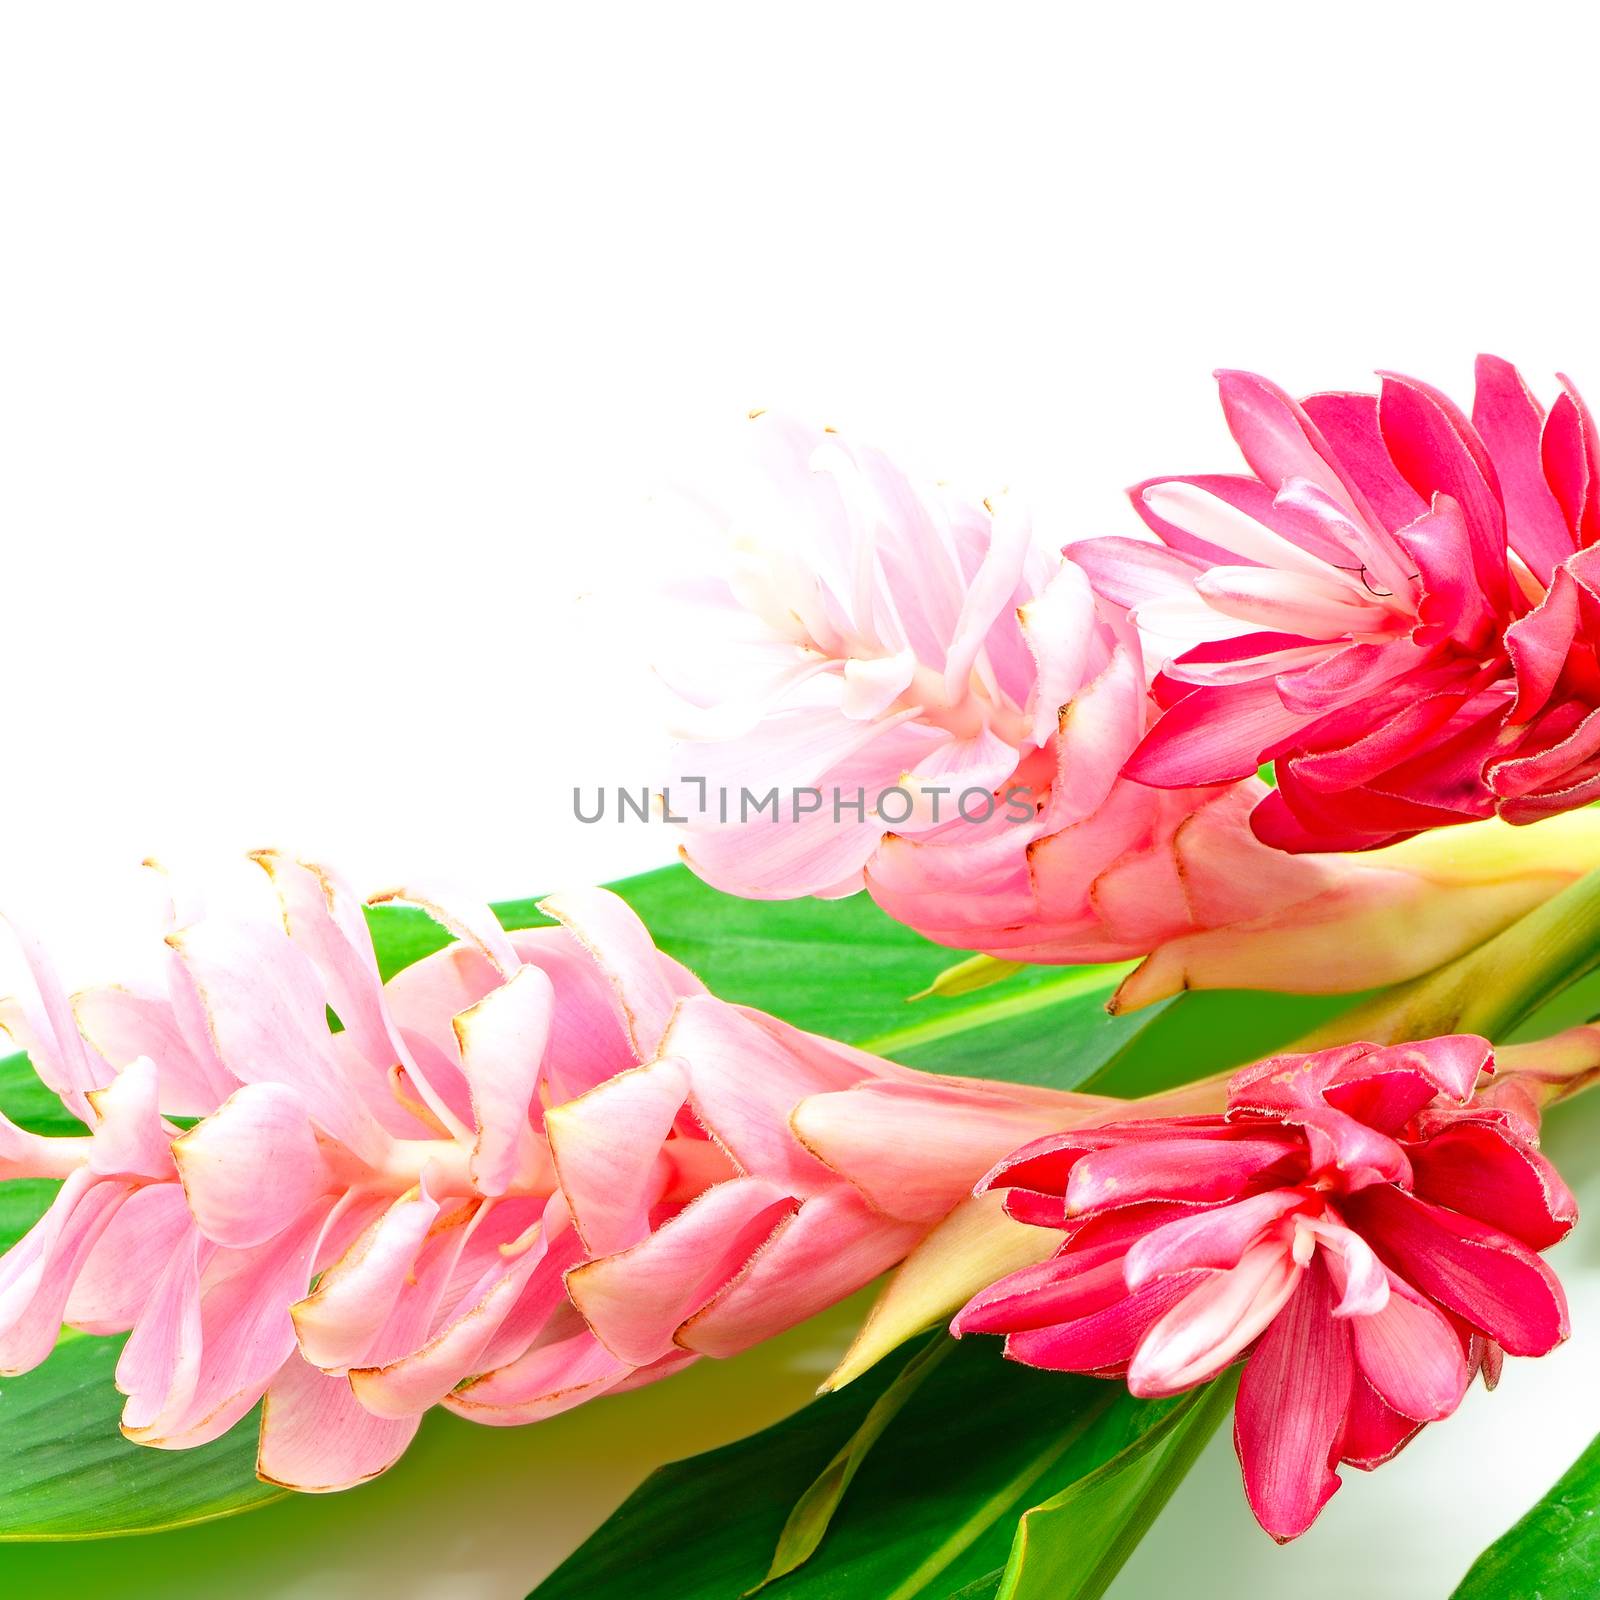 Colorful flower, Pink and Red Ginger or Ostrich Plume (Alpinia purpurata) isolated on a white background